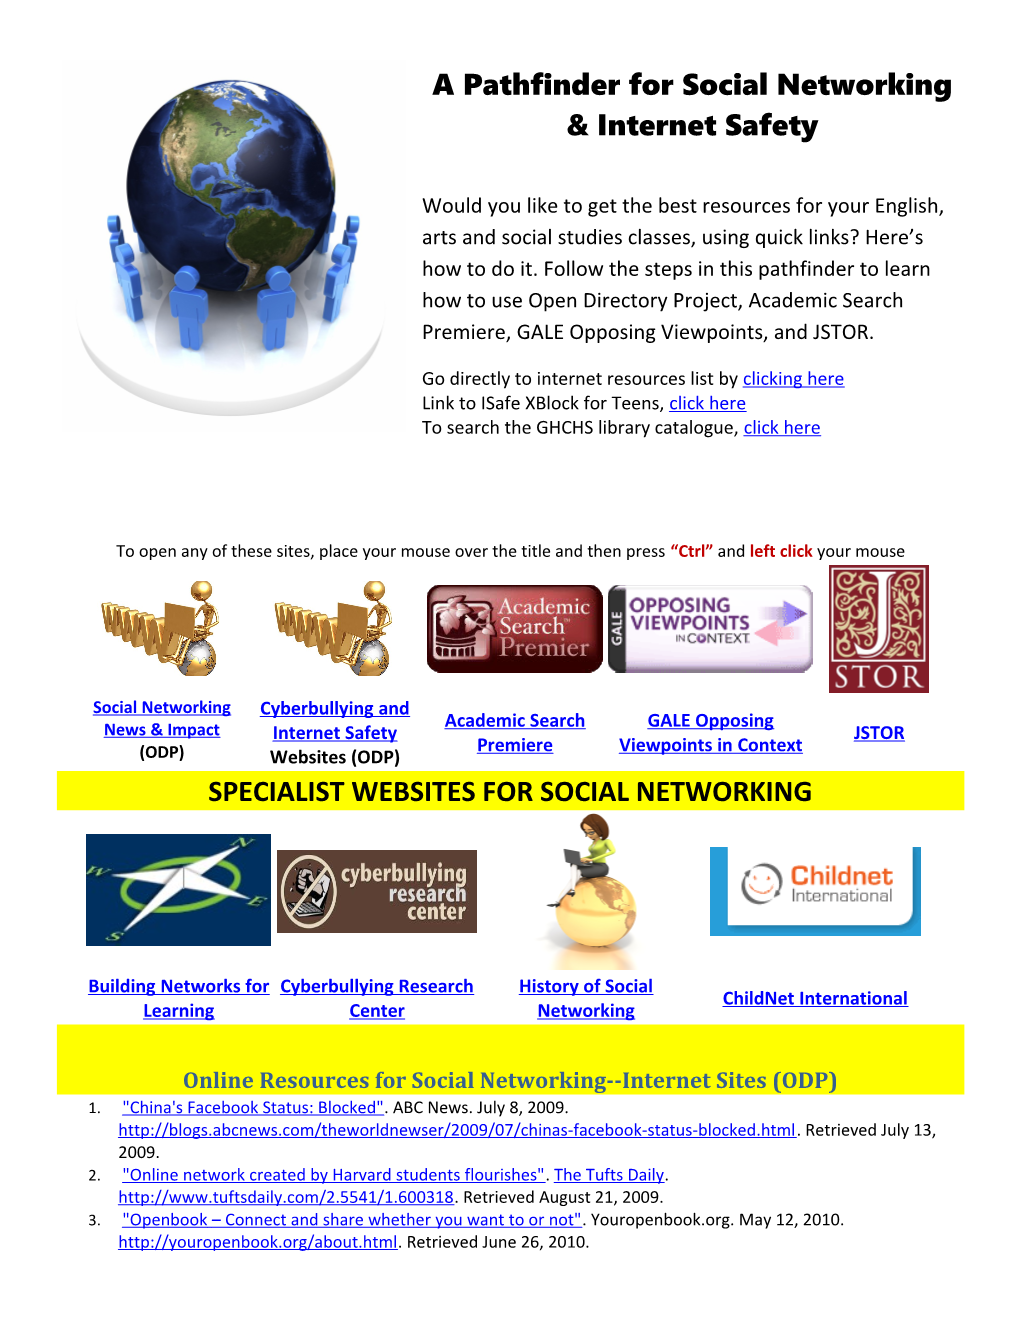 Online Resources for Social Networking Internet Sites (ODP)